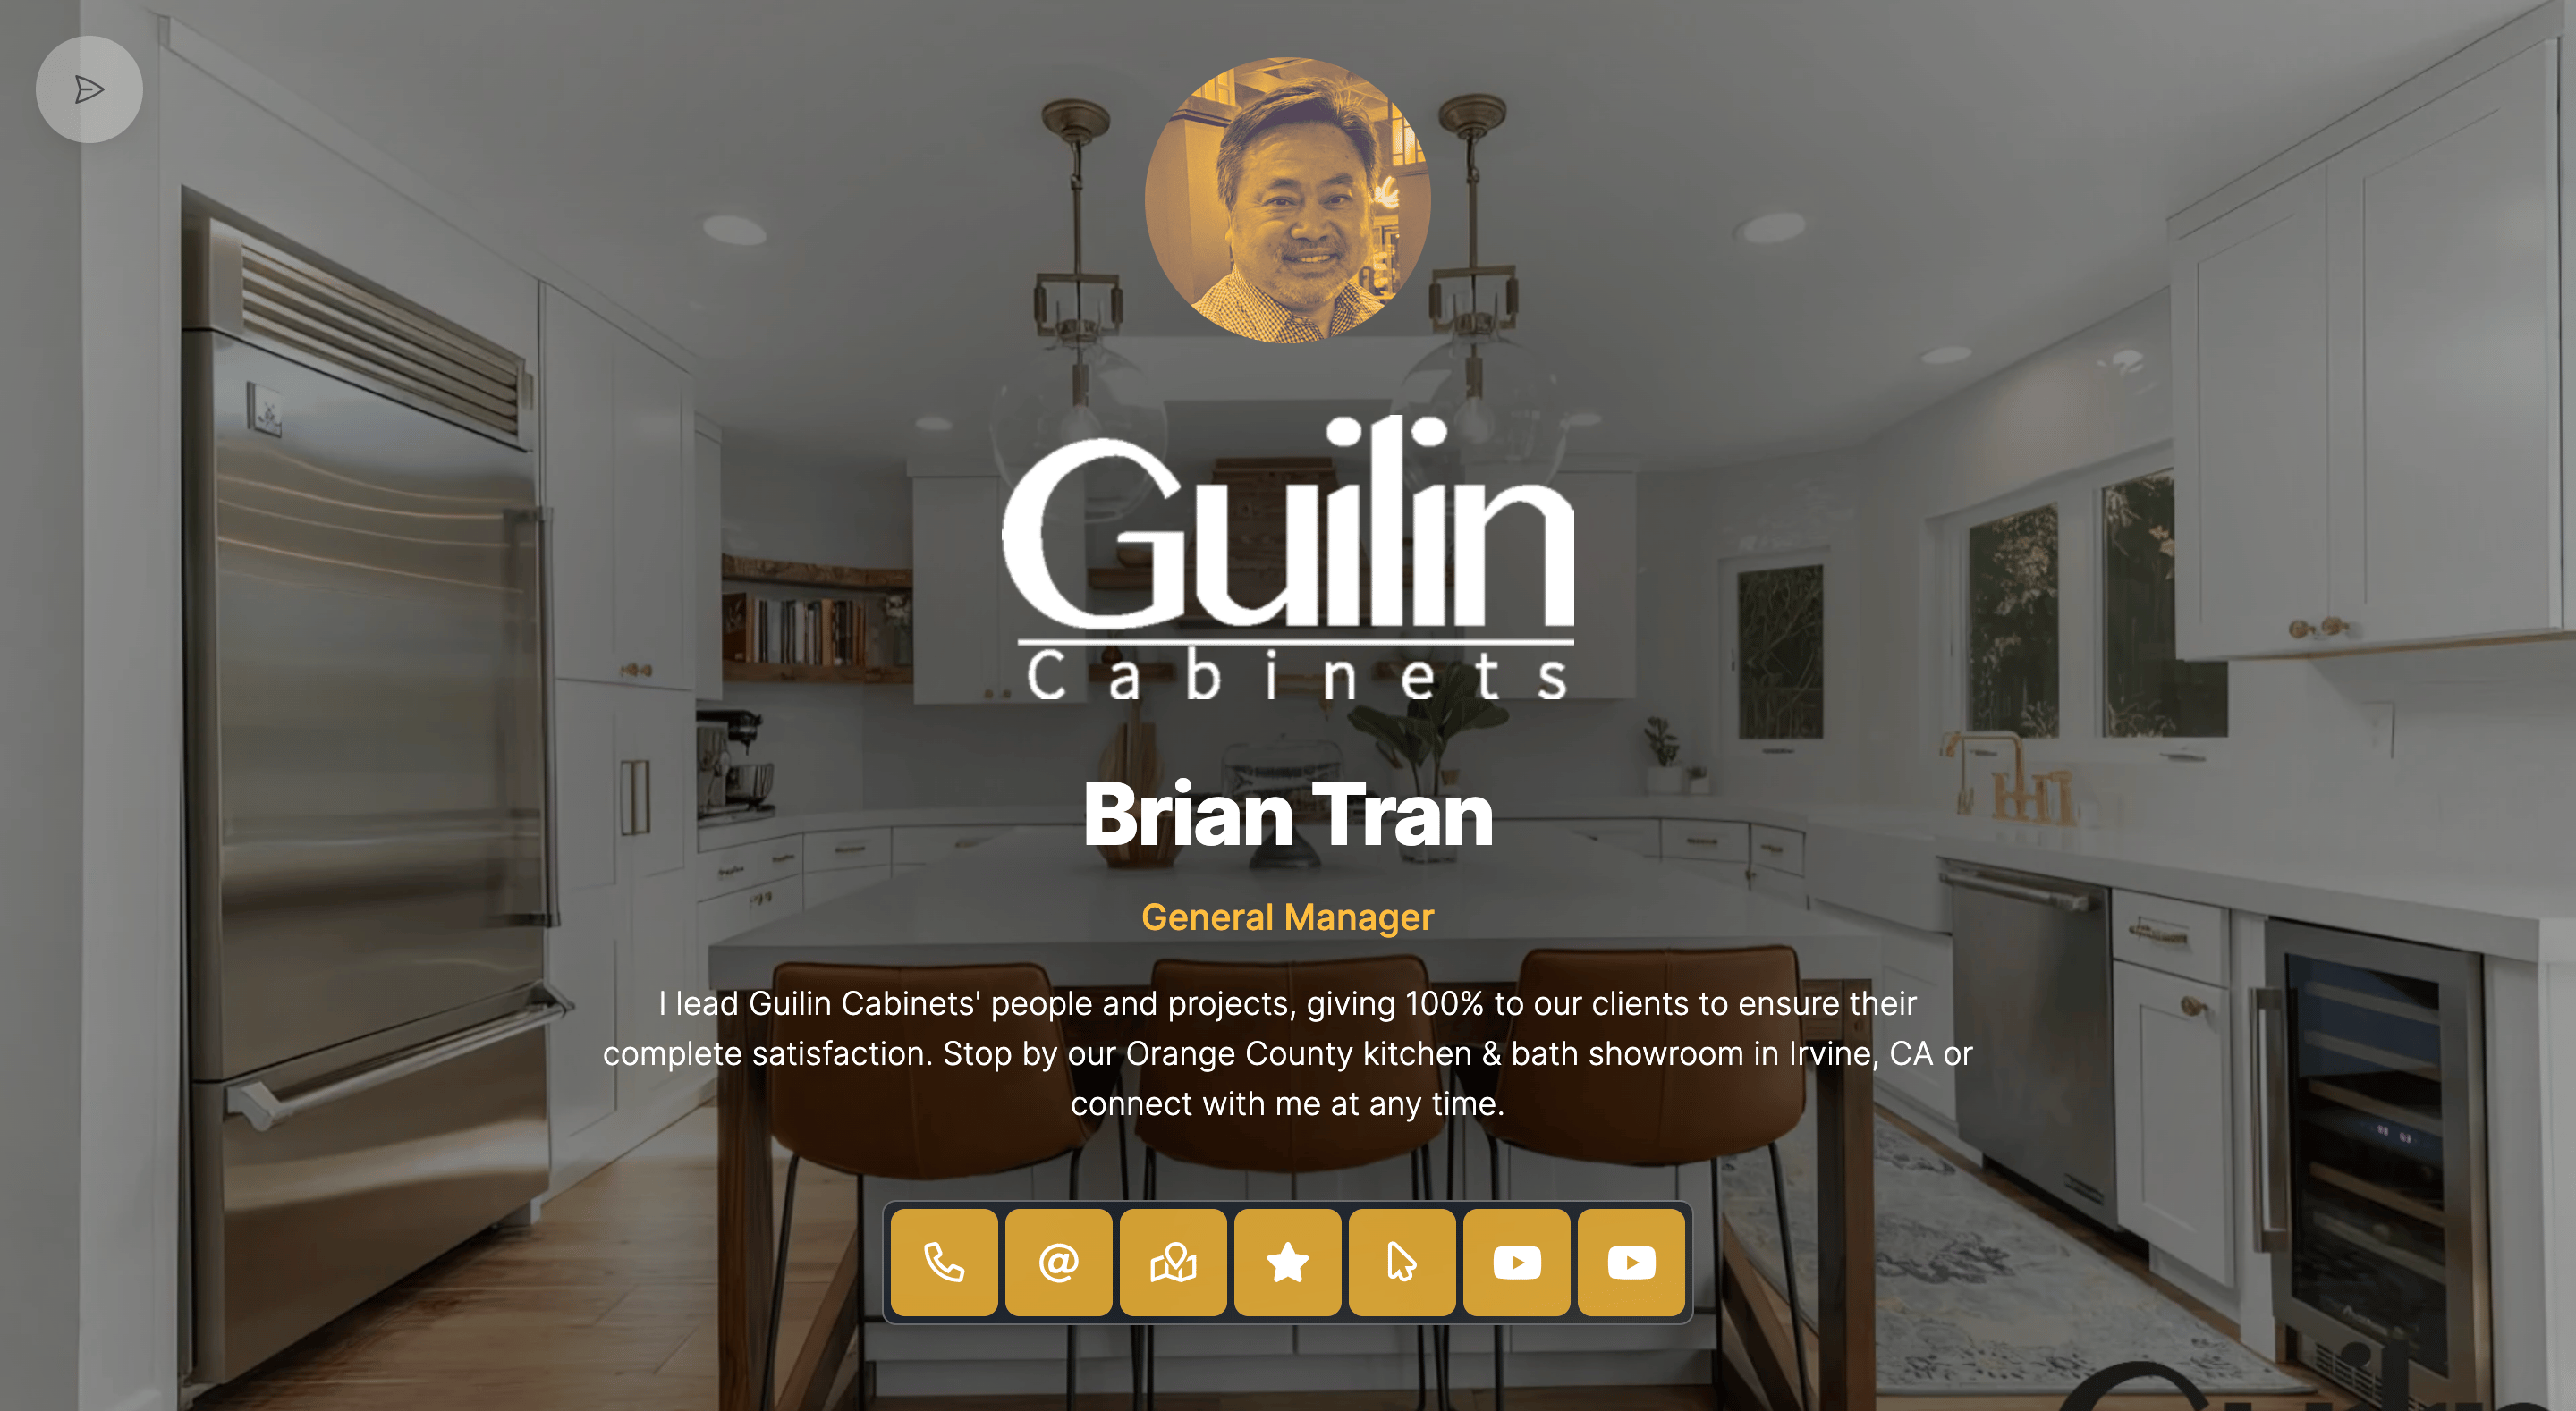 Digital business card for Brian Tran at Guilin Cabinets